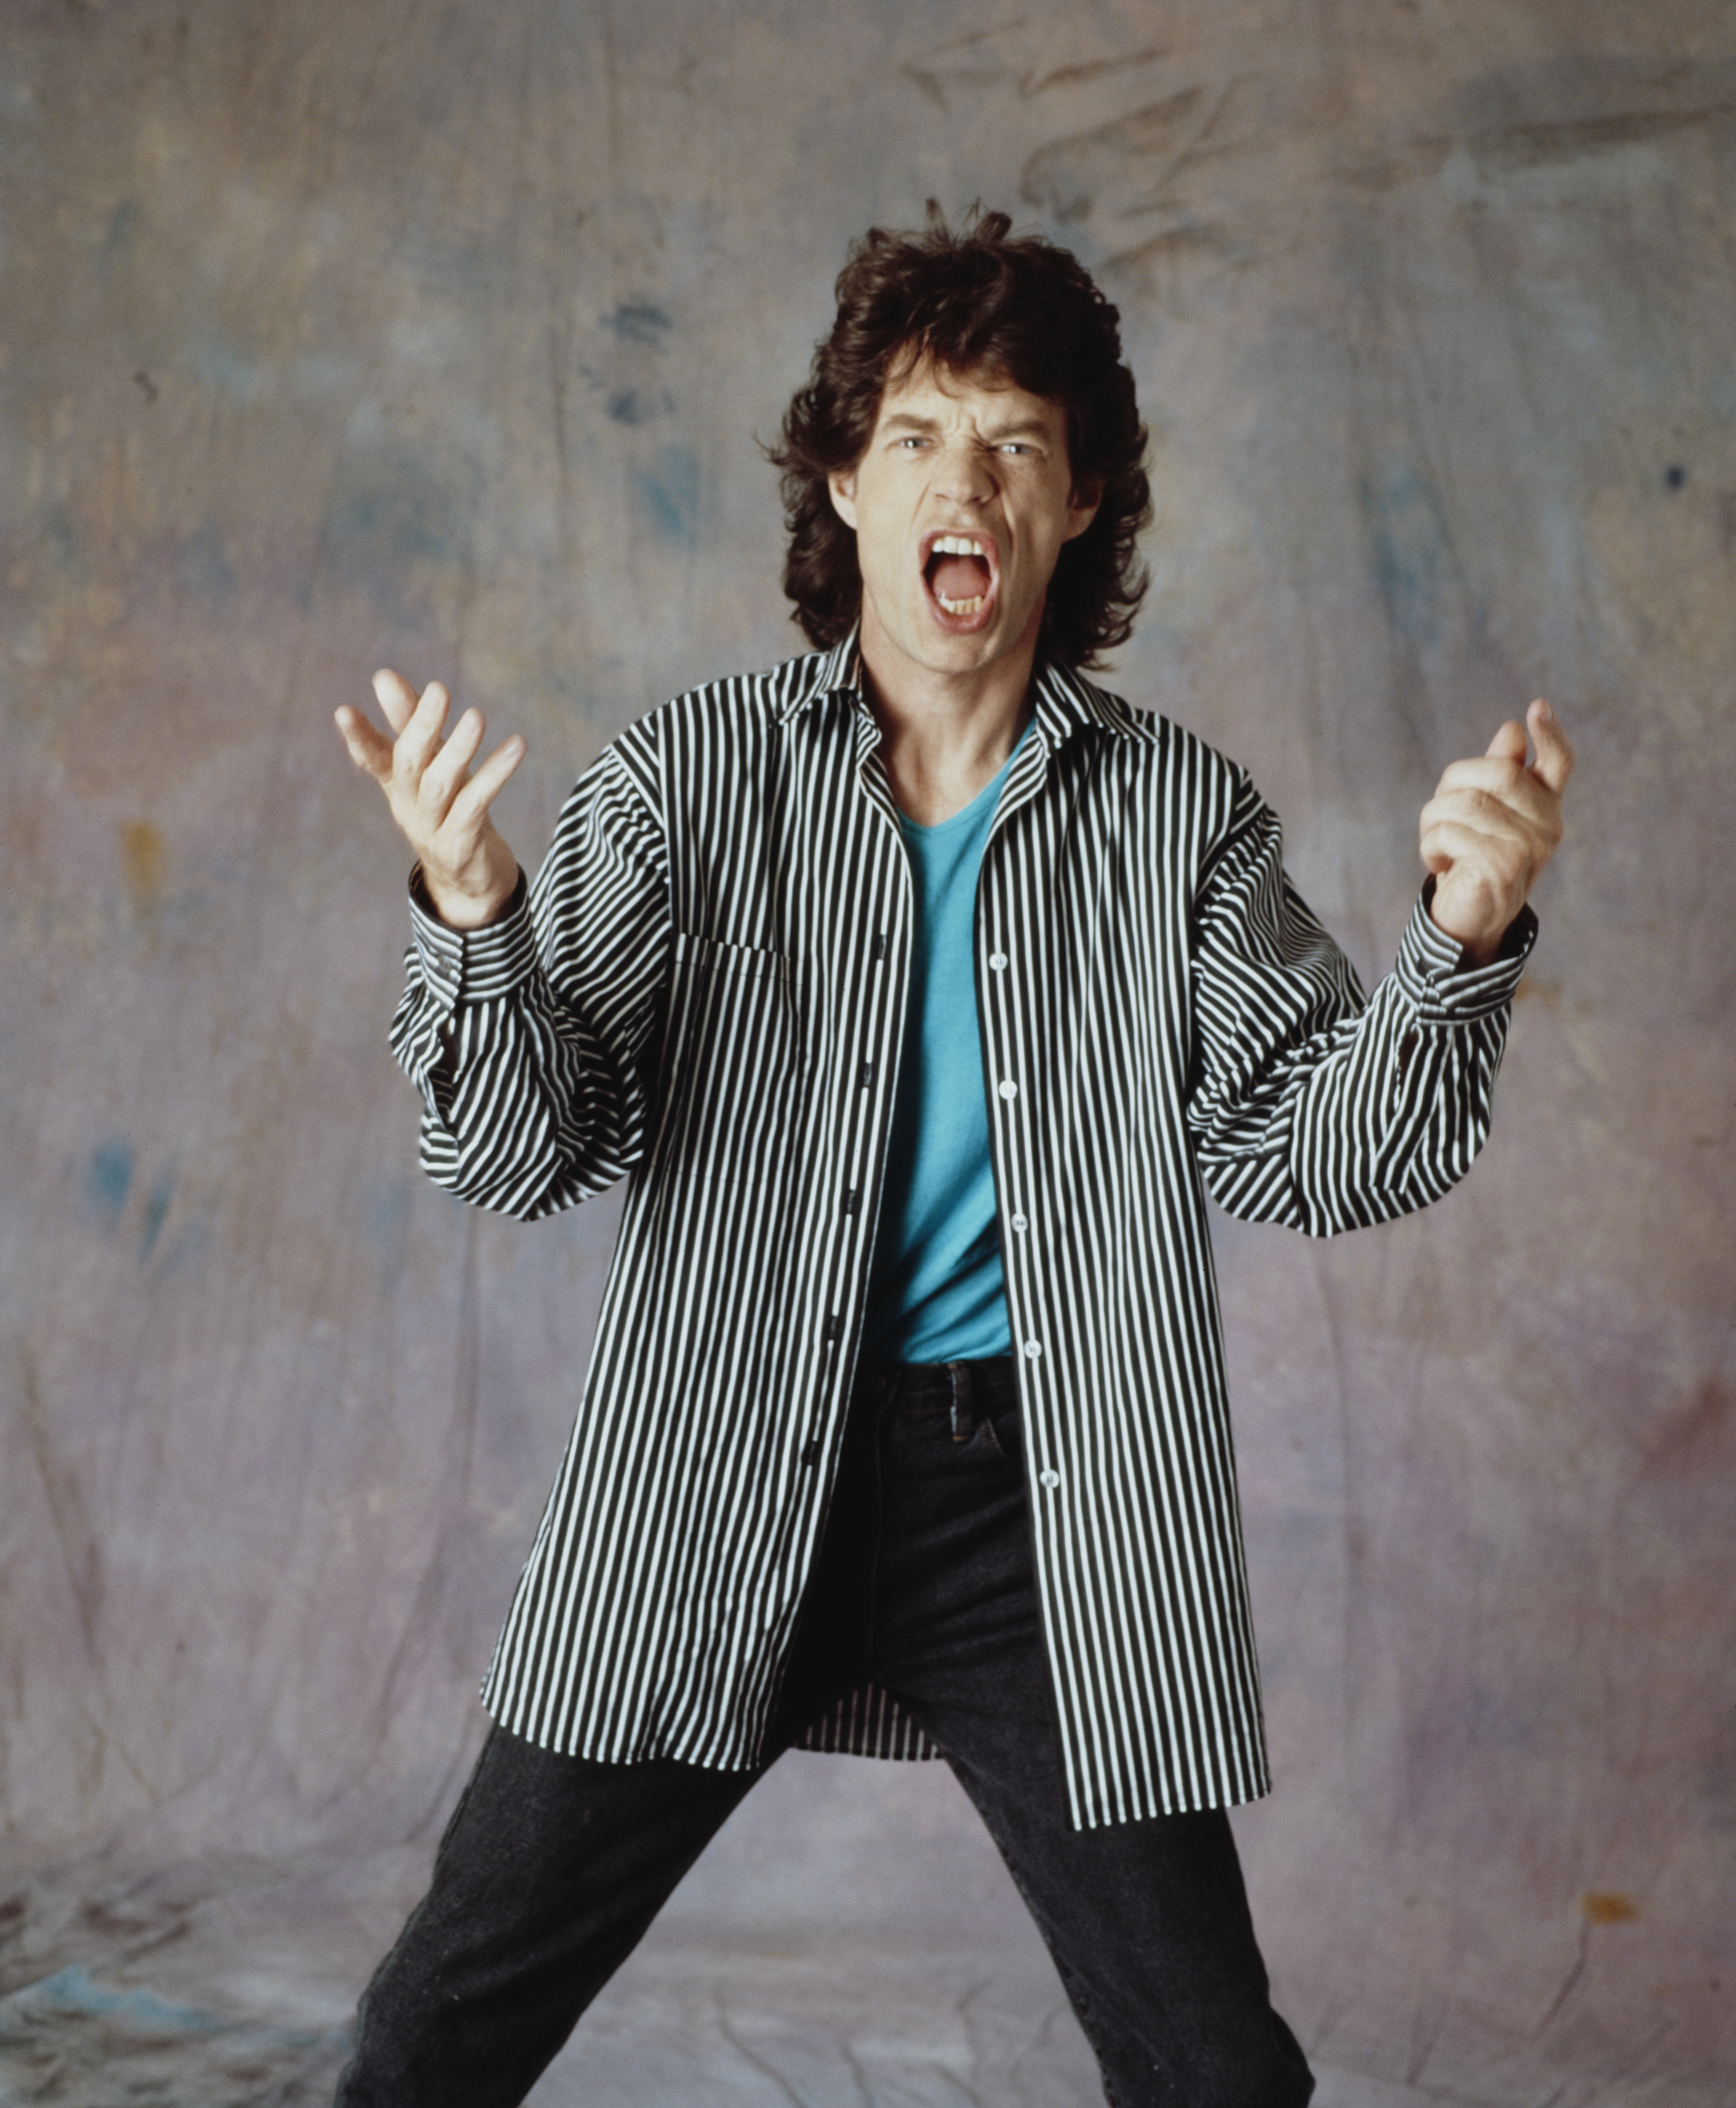 The Rolling Stones: Our 1989 Cover Story